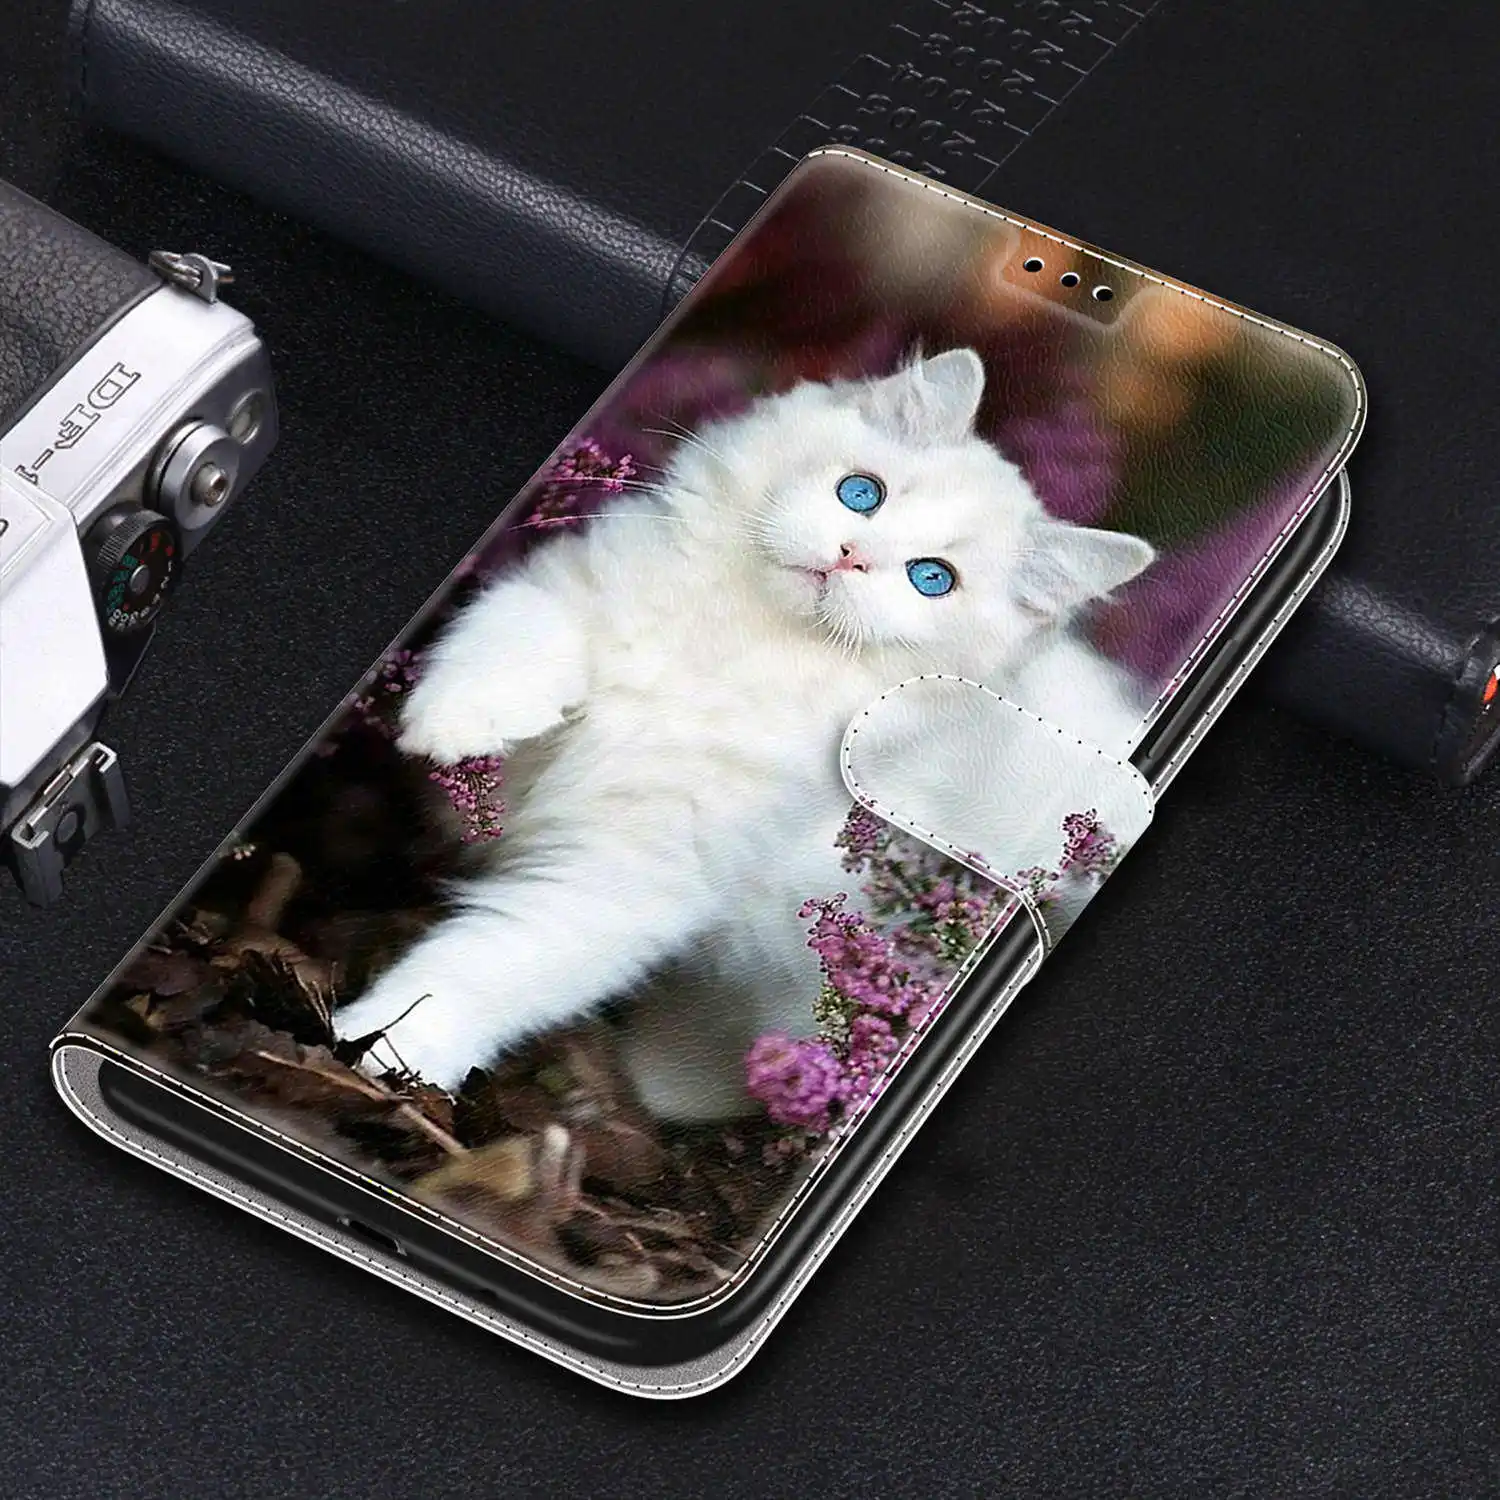 samsung silicone Flip Leather Case For Samsung Galaxy A6 A7 A8 2018 Case Ultra Thin Wallet Book Cover For Samsung A5 2016 2017 Cute Cat Phone Bag kawaii samsung cases